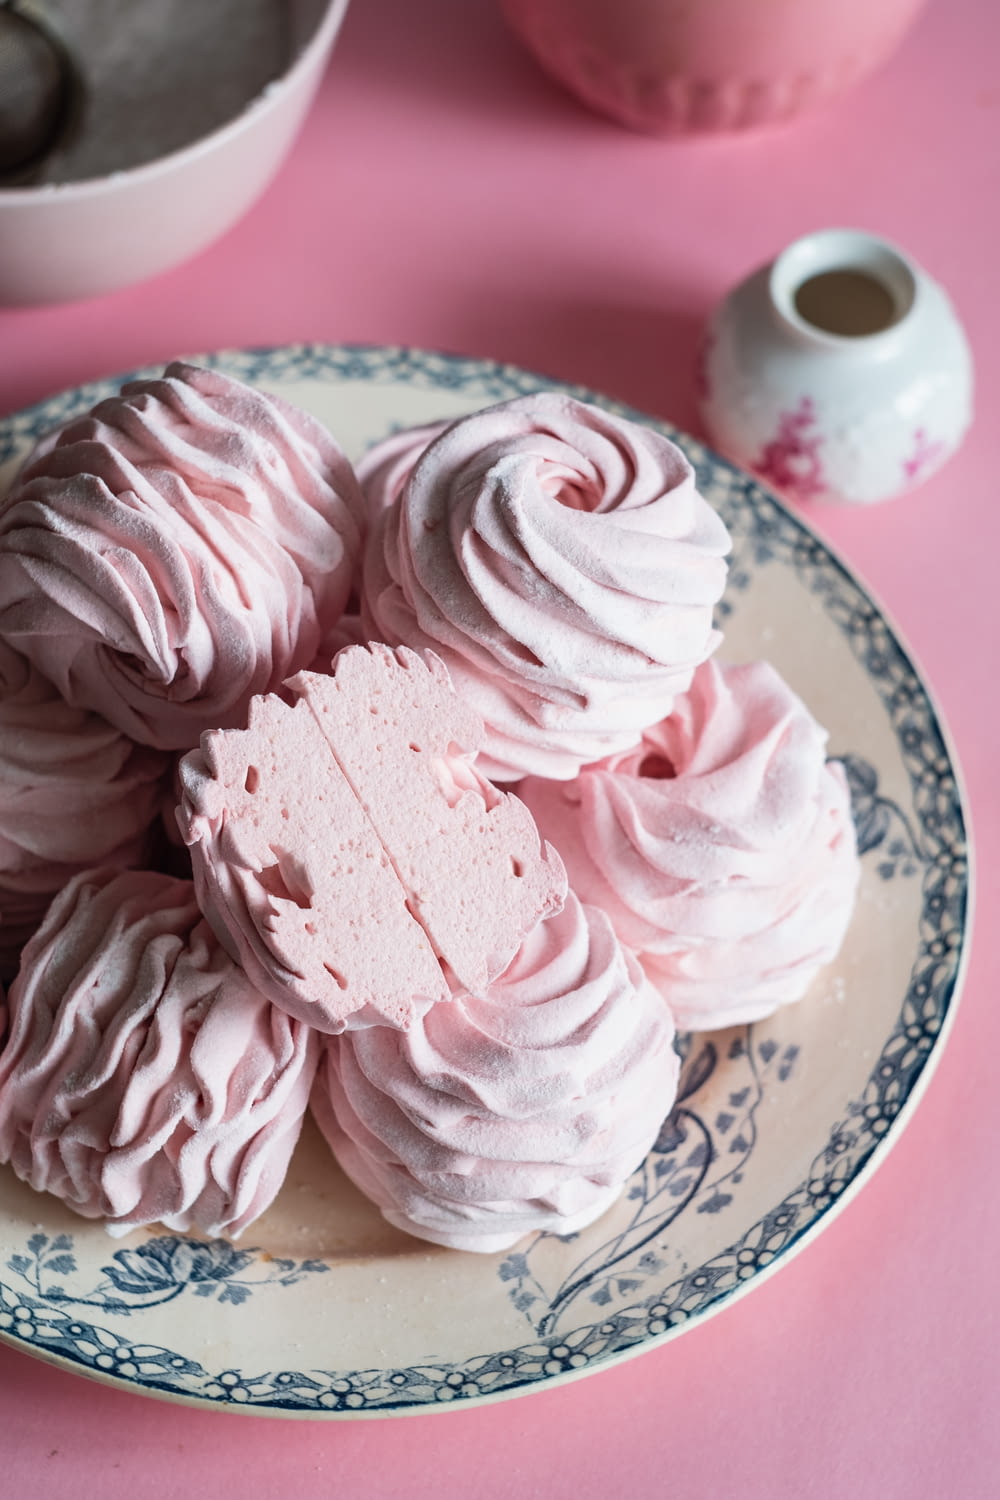 a plate of pink meringue on a pink table